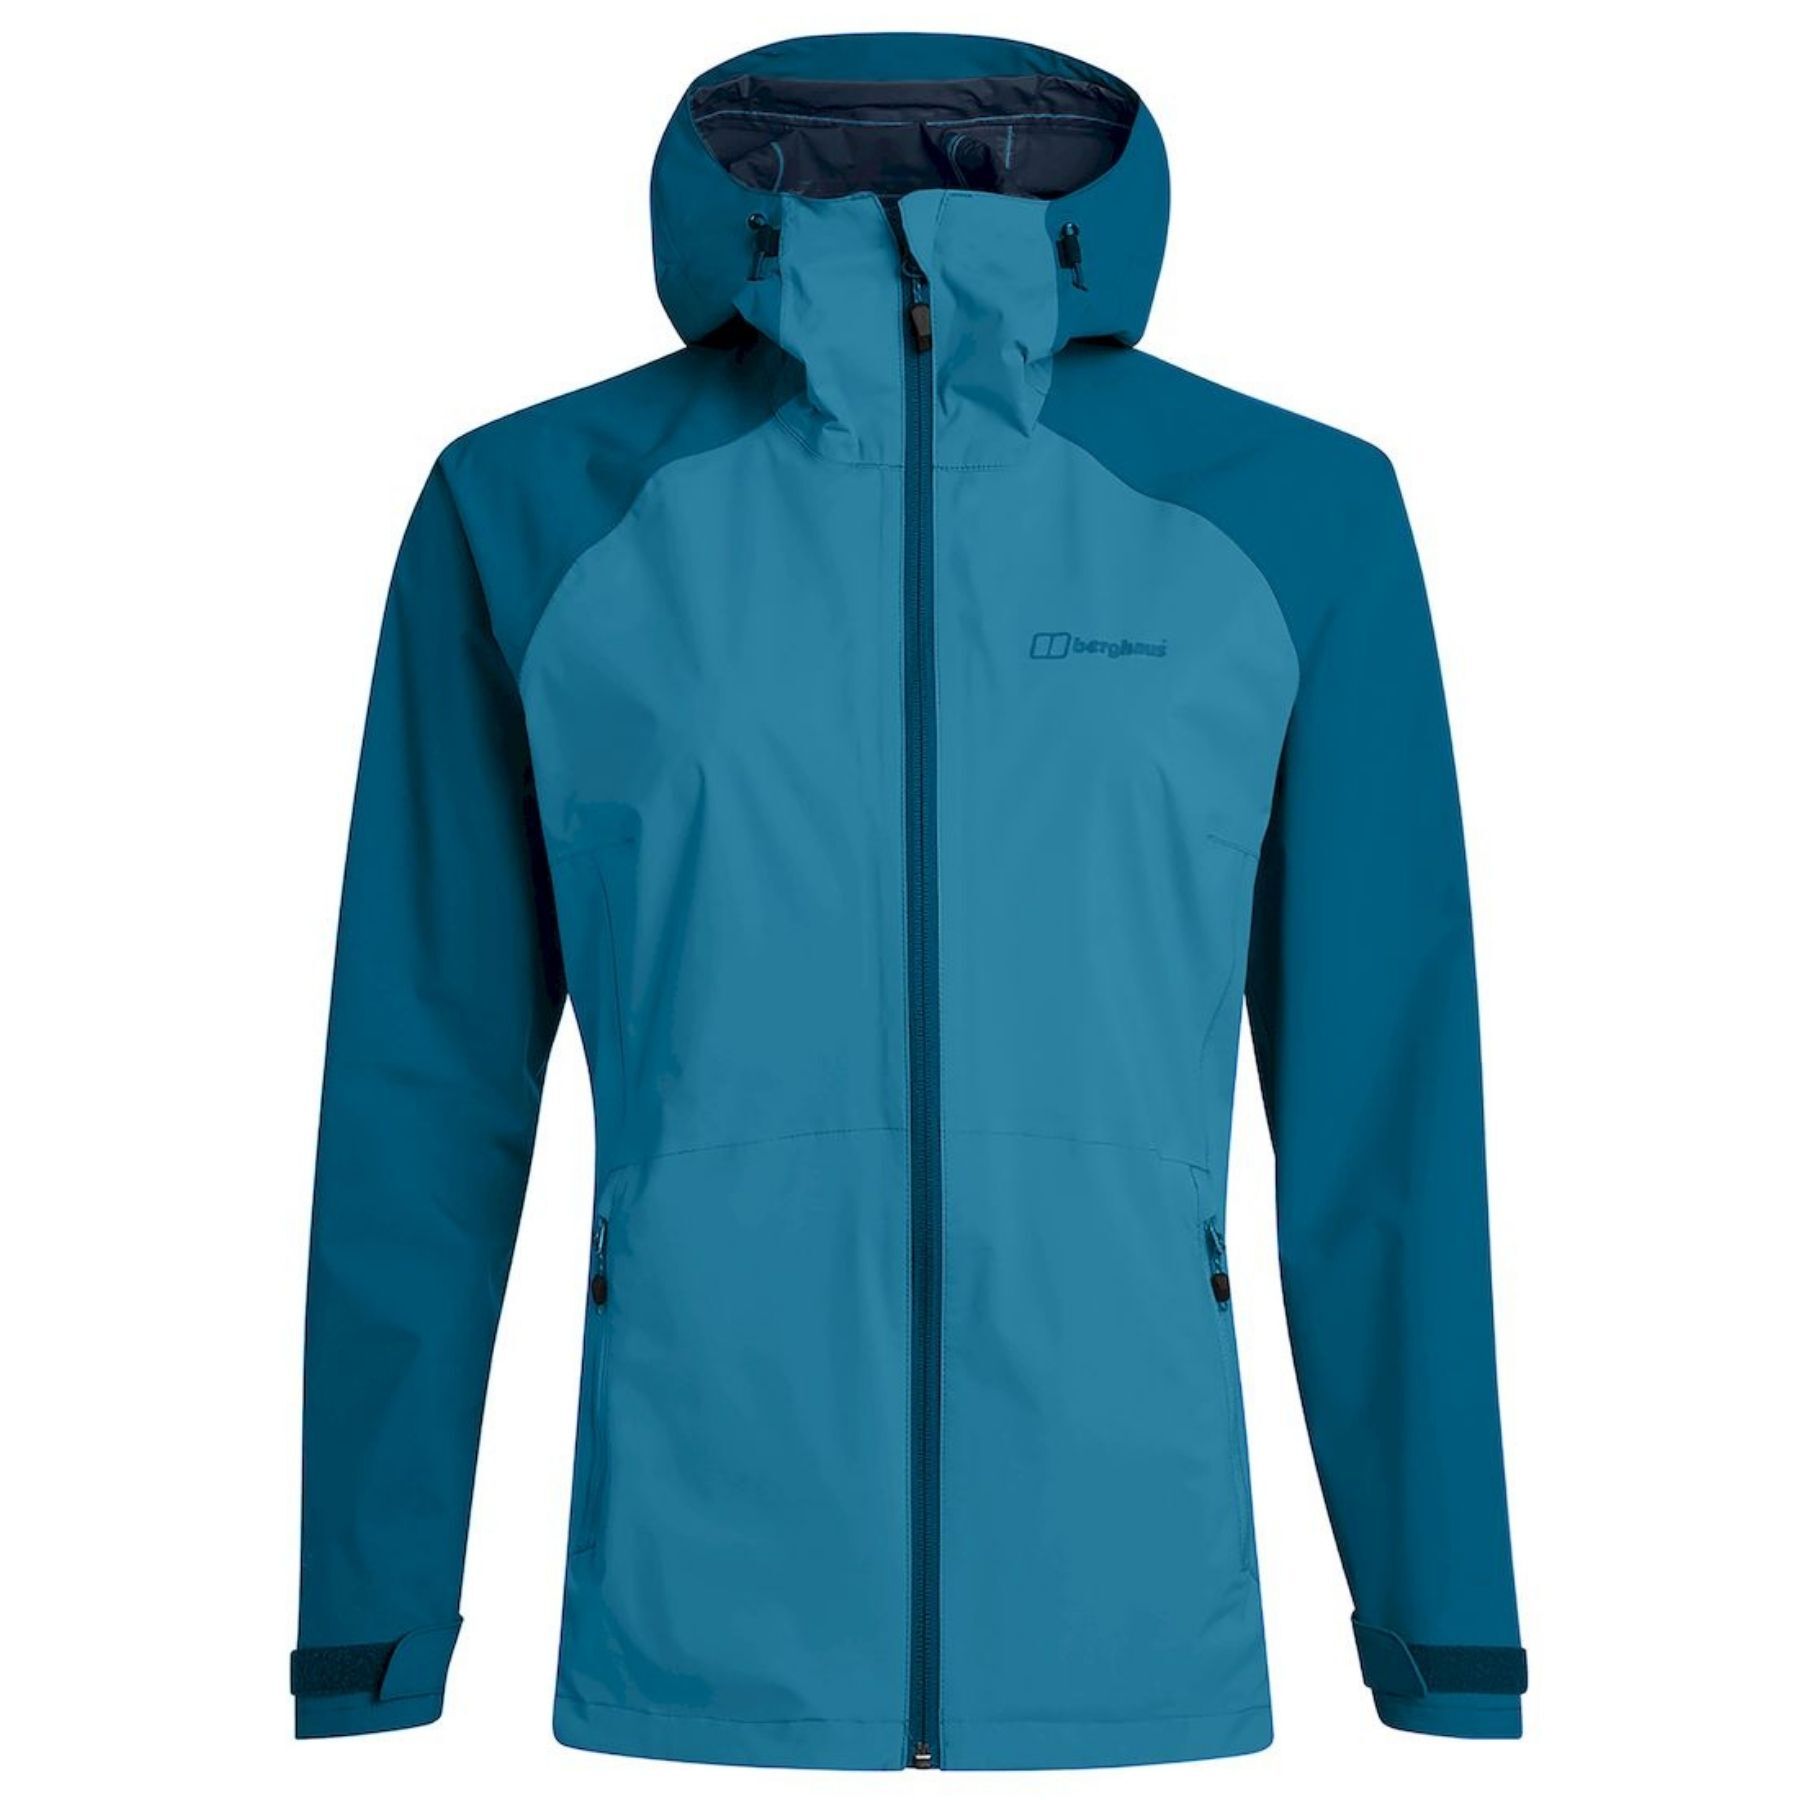 Berghaus Deluge Pro Shell Jacket - Chaqueta impermeable - Mujer